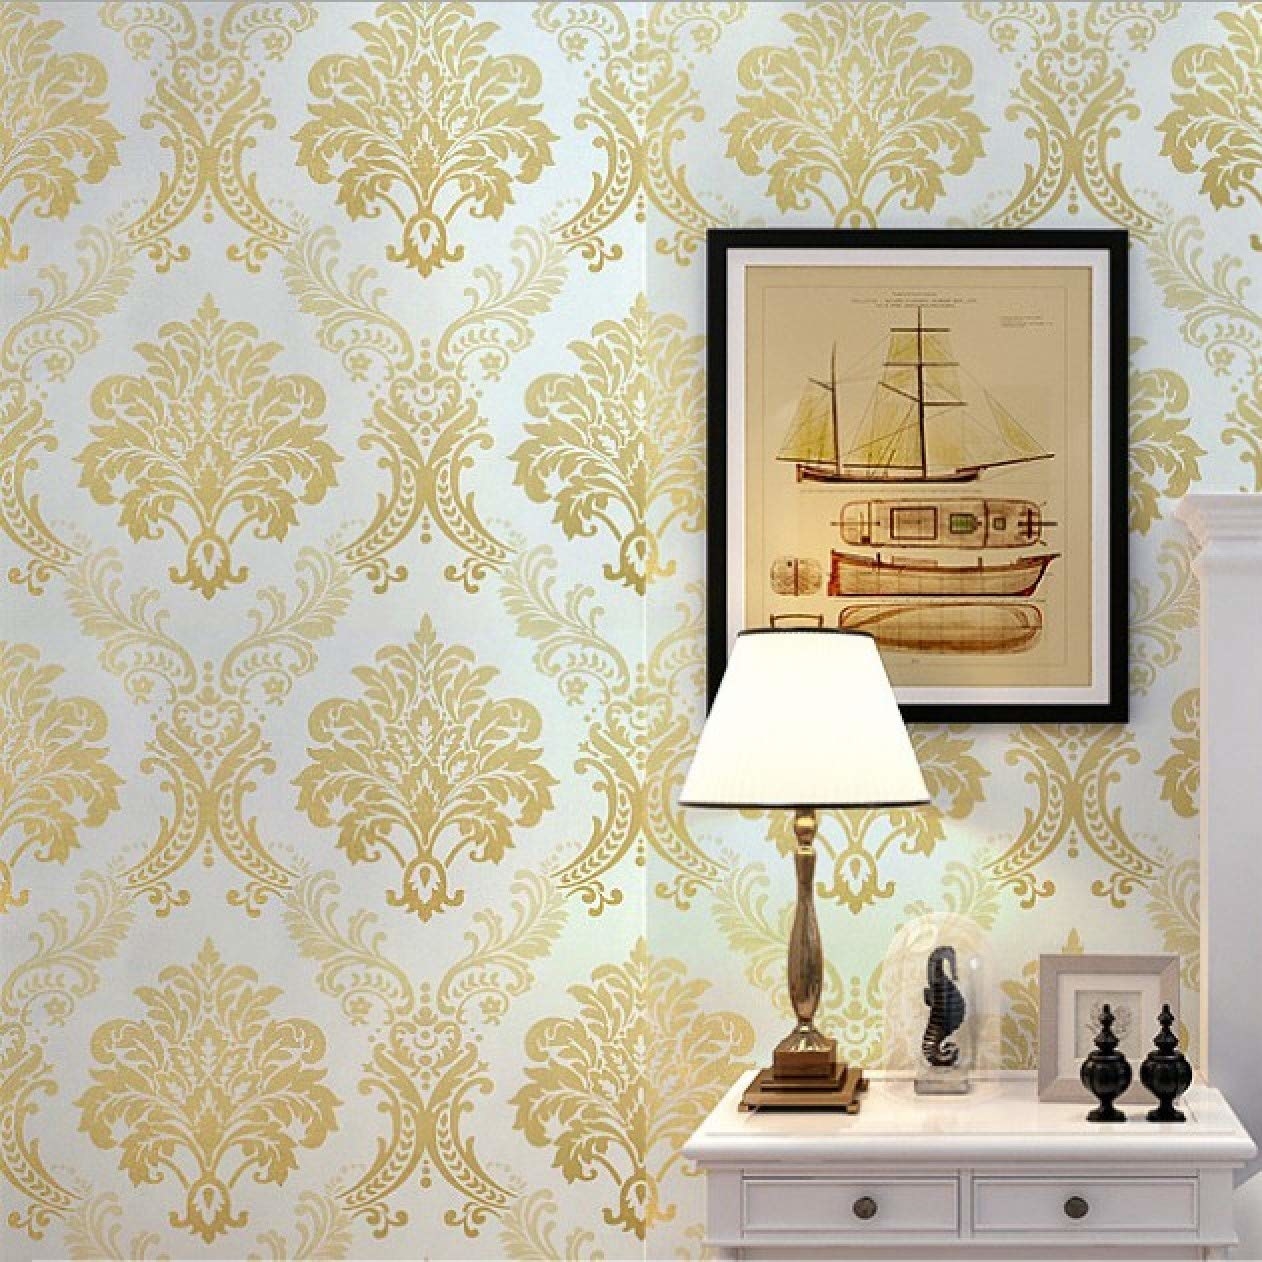 A golden and white wallpaper against a table with home decor items on it